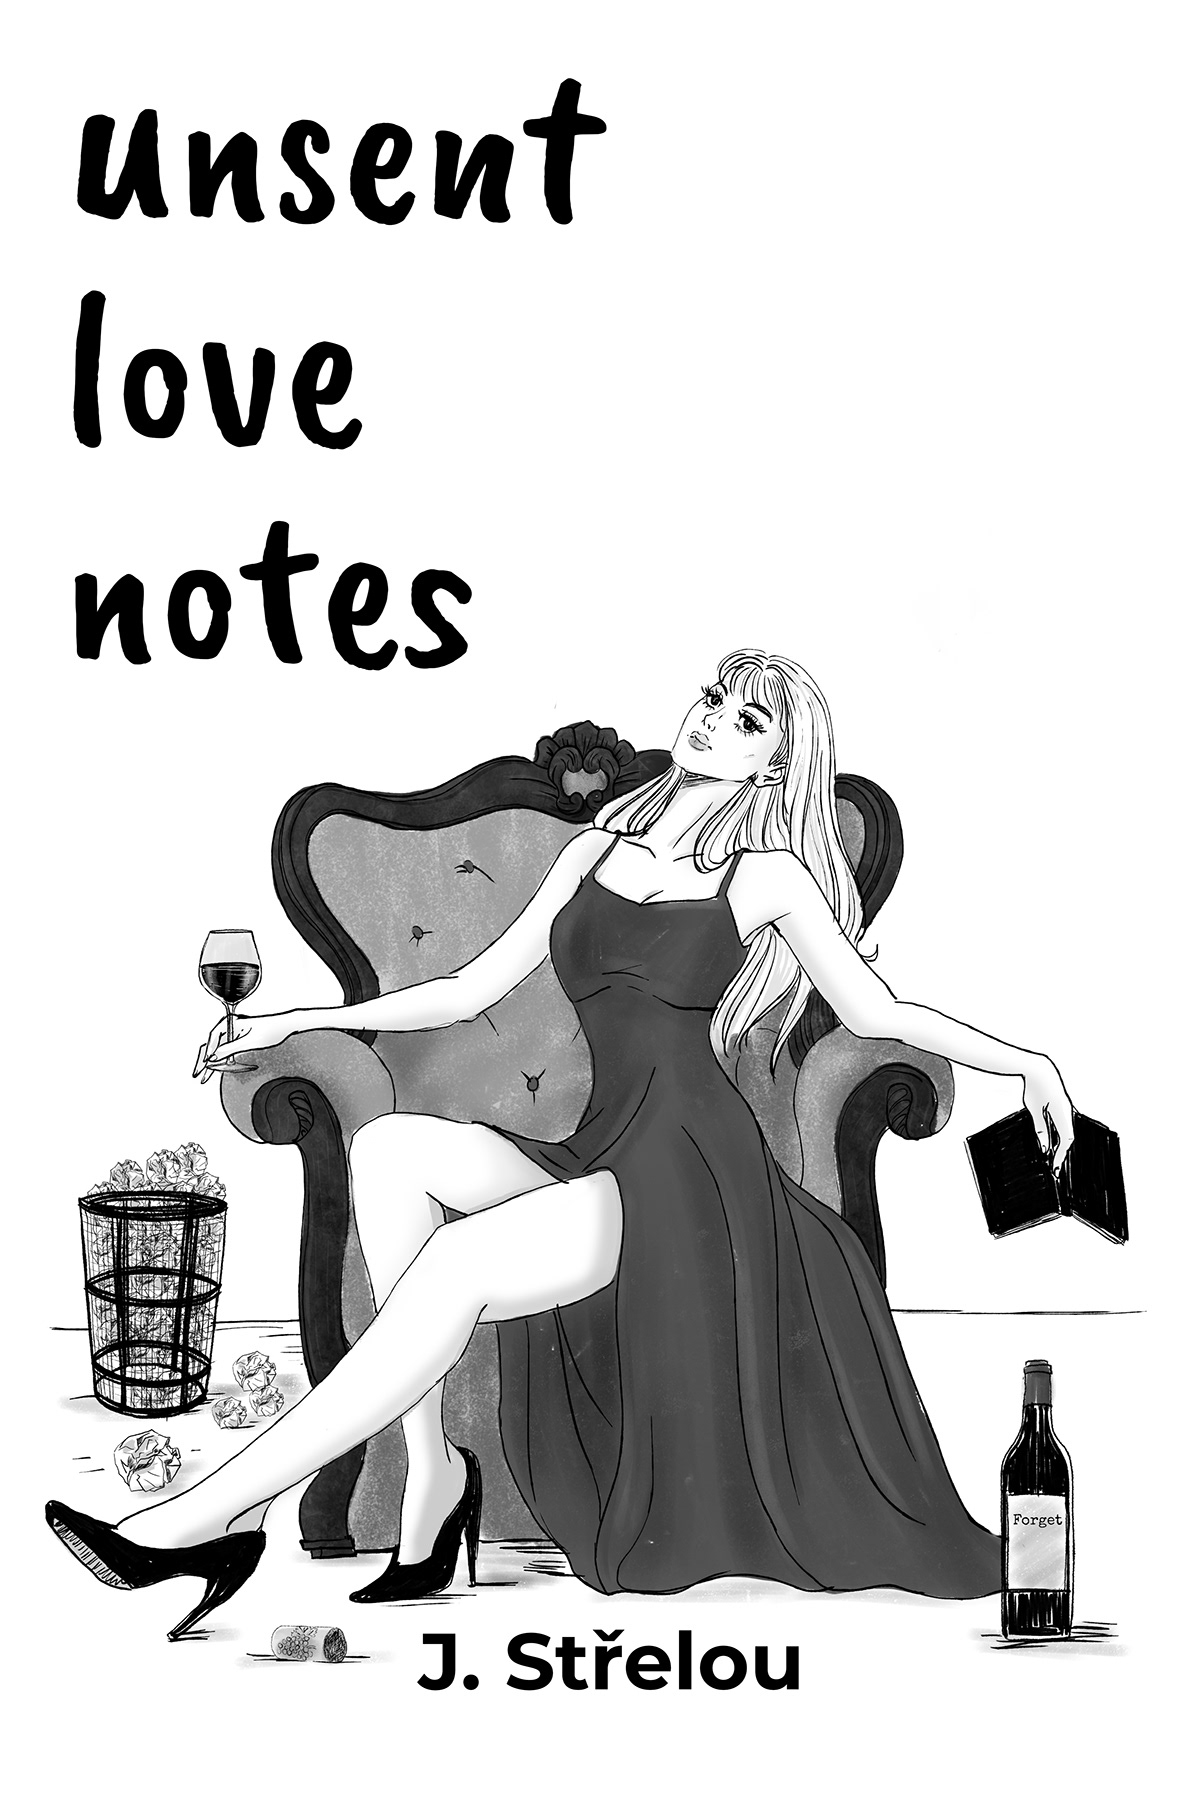 Book Cover Illustration by Karen Alarcon for " Unsent Love Notes" by Julia Strelou